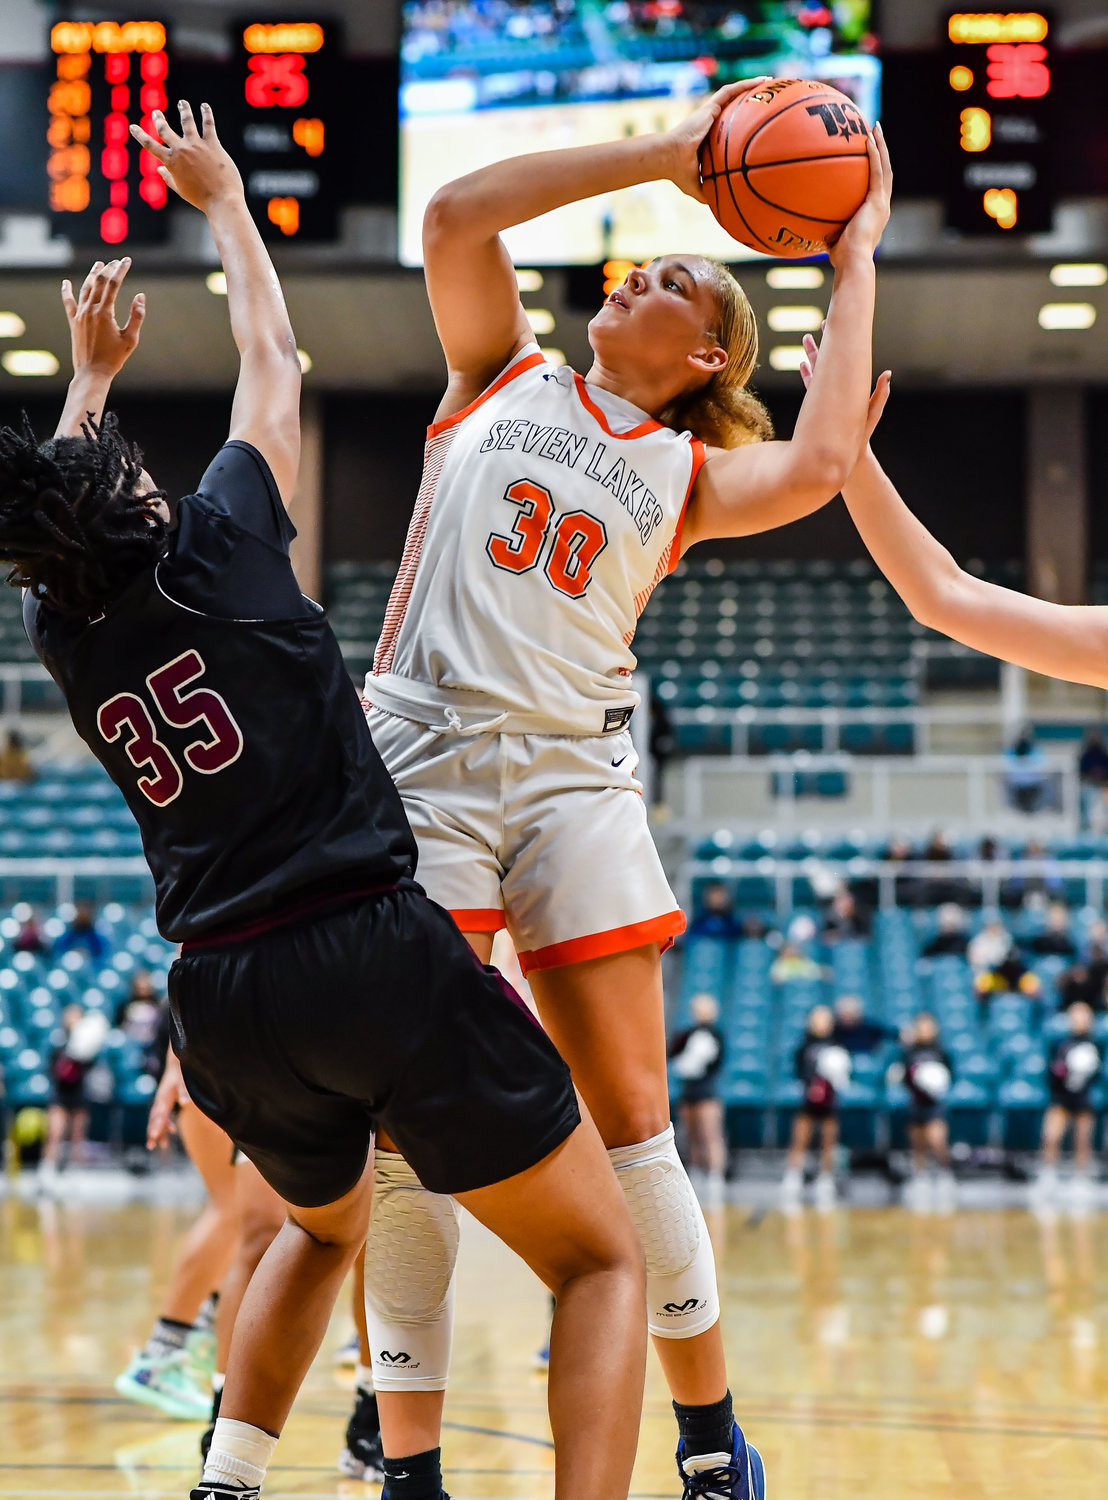 Katy Tx. Feb 25, 2022:  Seven Lakes Justice Carlton #30 goes up for the shot during the Regional SemiFinal playoff game, Seven Lakes vs Pearland at the Merrell Center. (Photo by Mark Goodman / Katy Times)